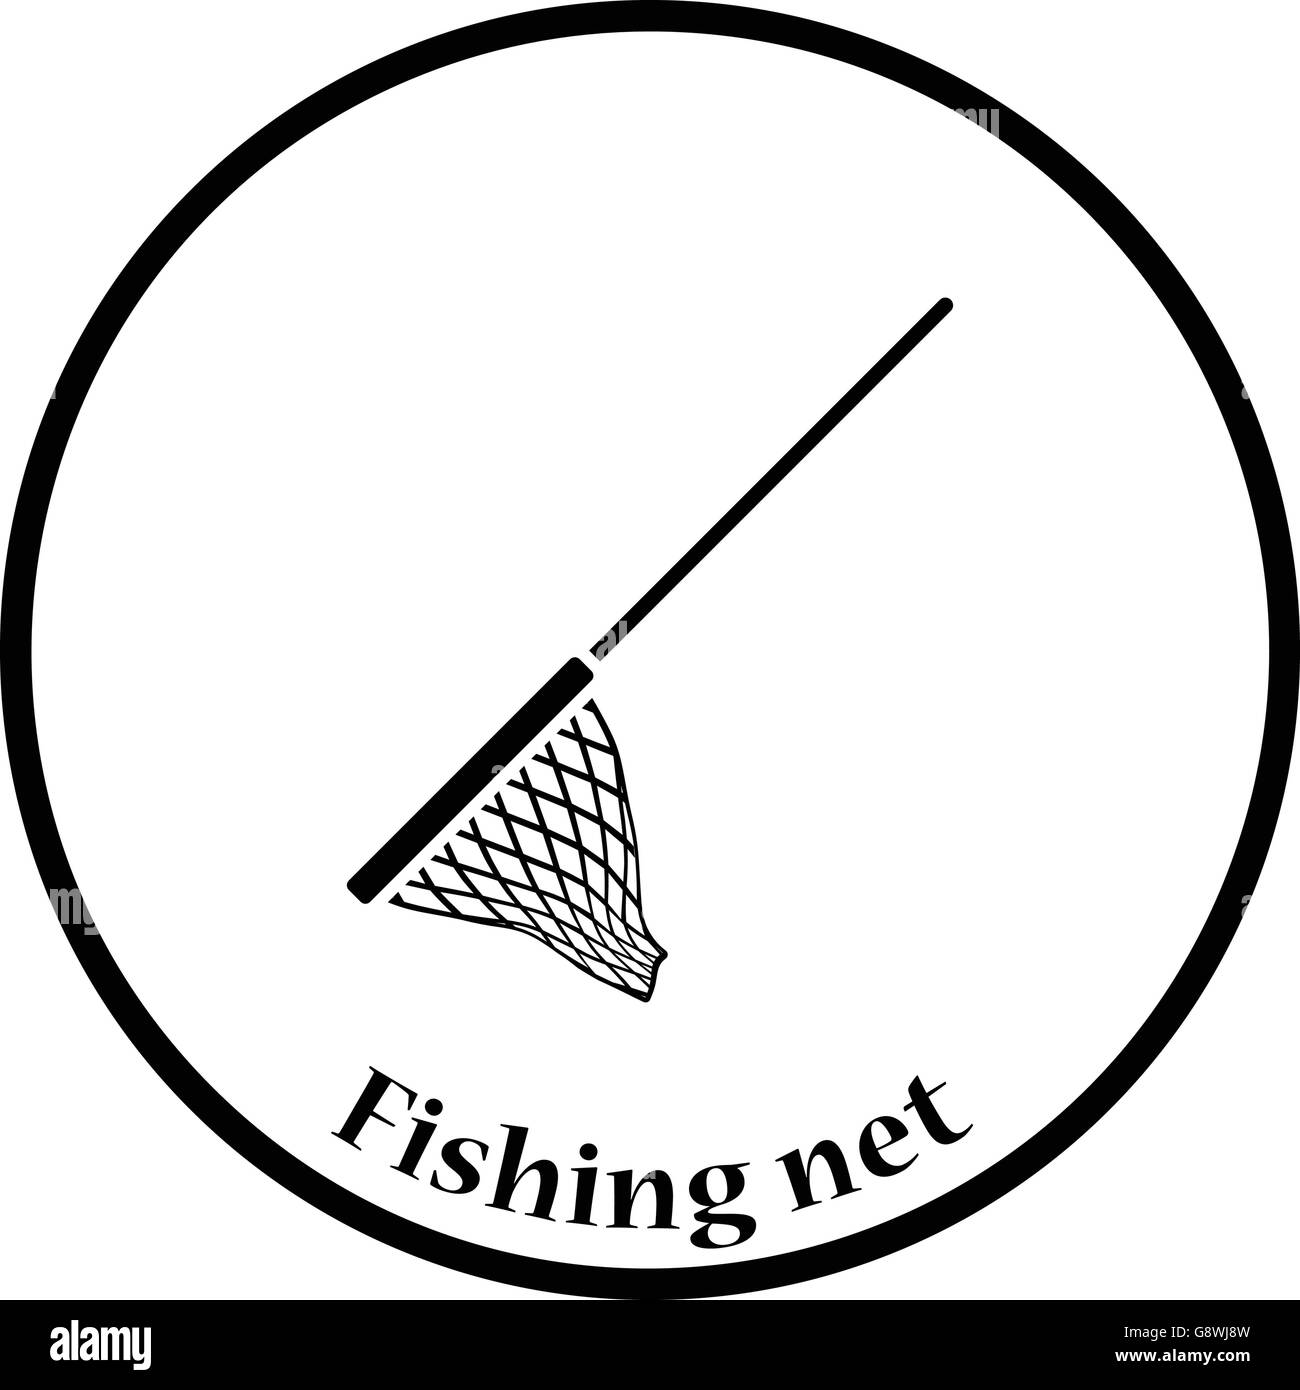 Fishing hunting net icon Stock Vector Images - Page 2 - Alamy